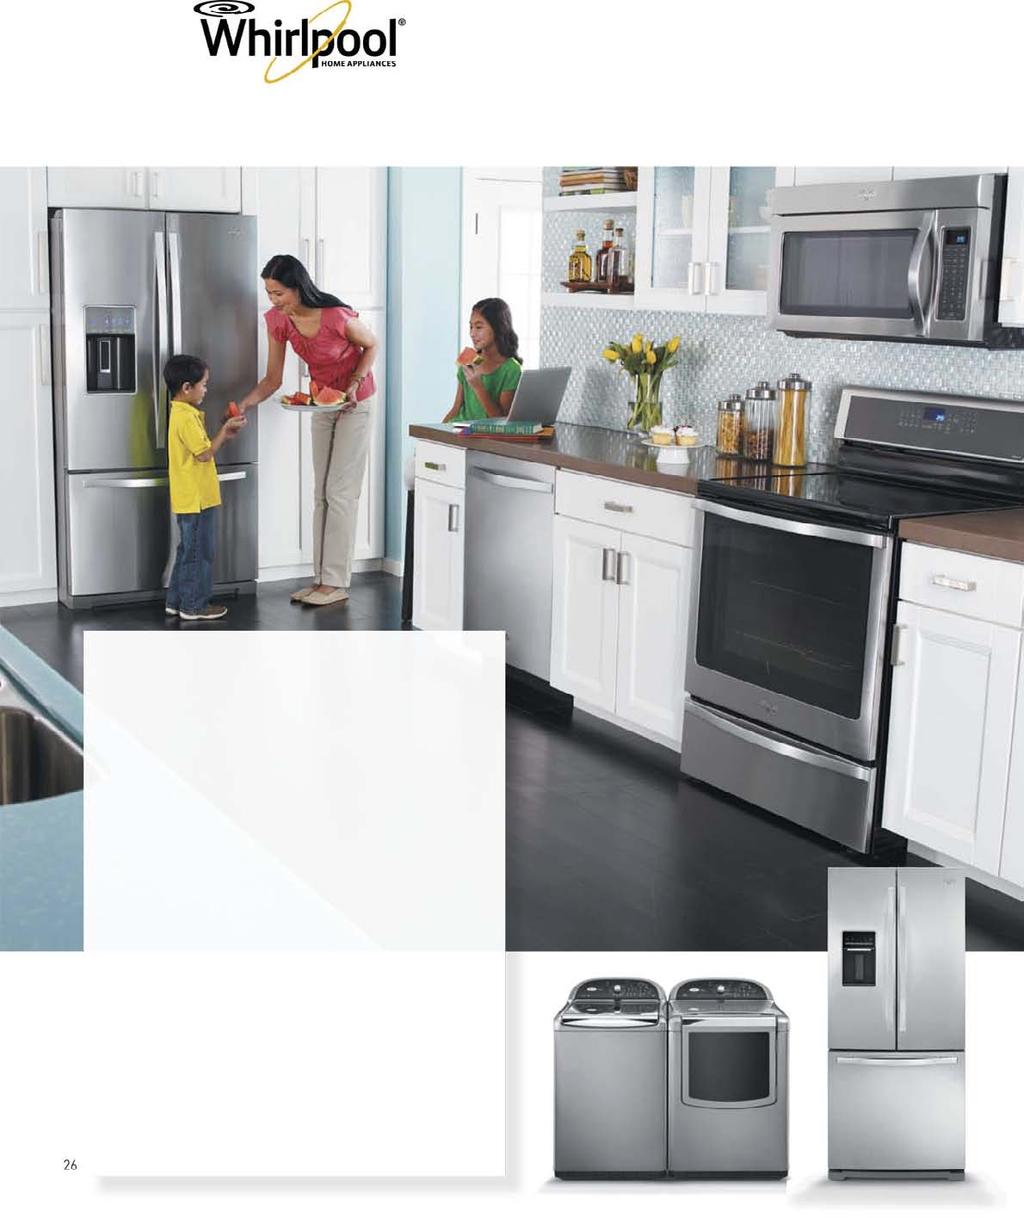 Whirlpool Available to consumers nearly everywhere in the world, Whirlpool, the company s flagship brand, has an unmatched passion for creating solutions that fit into every consumer s lifestyle and